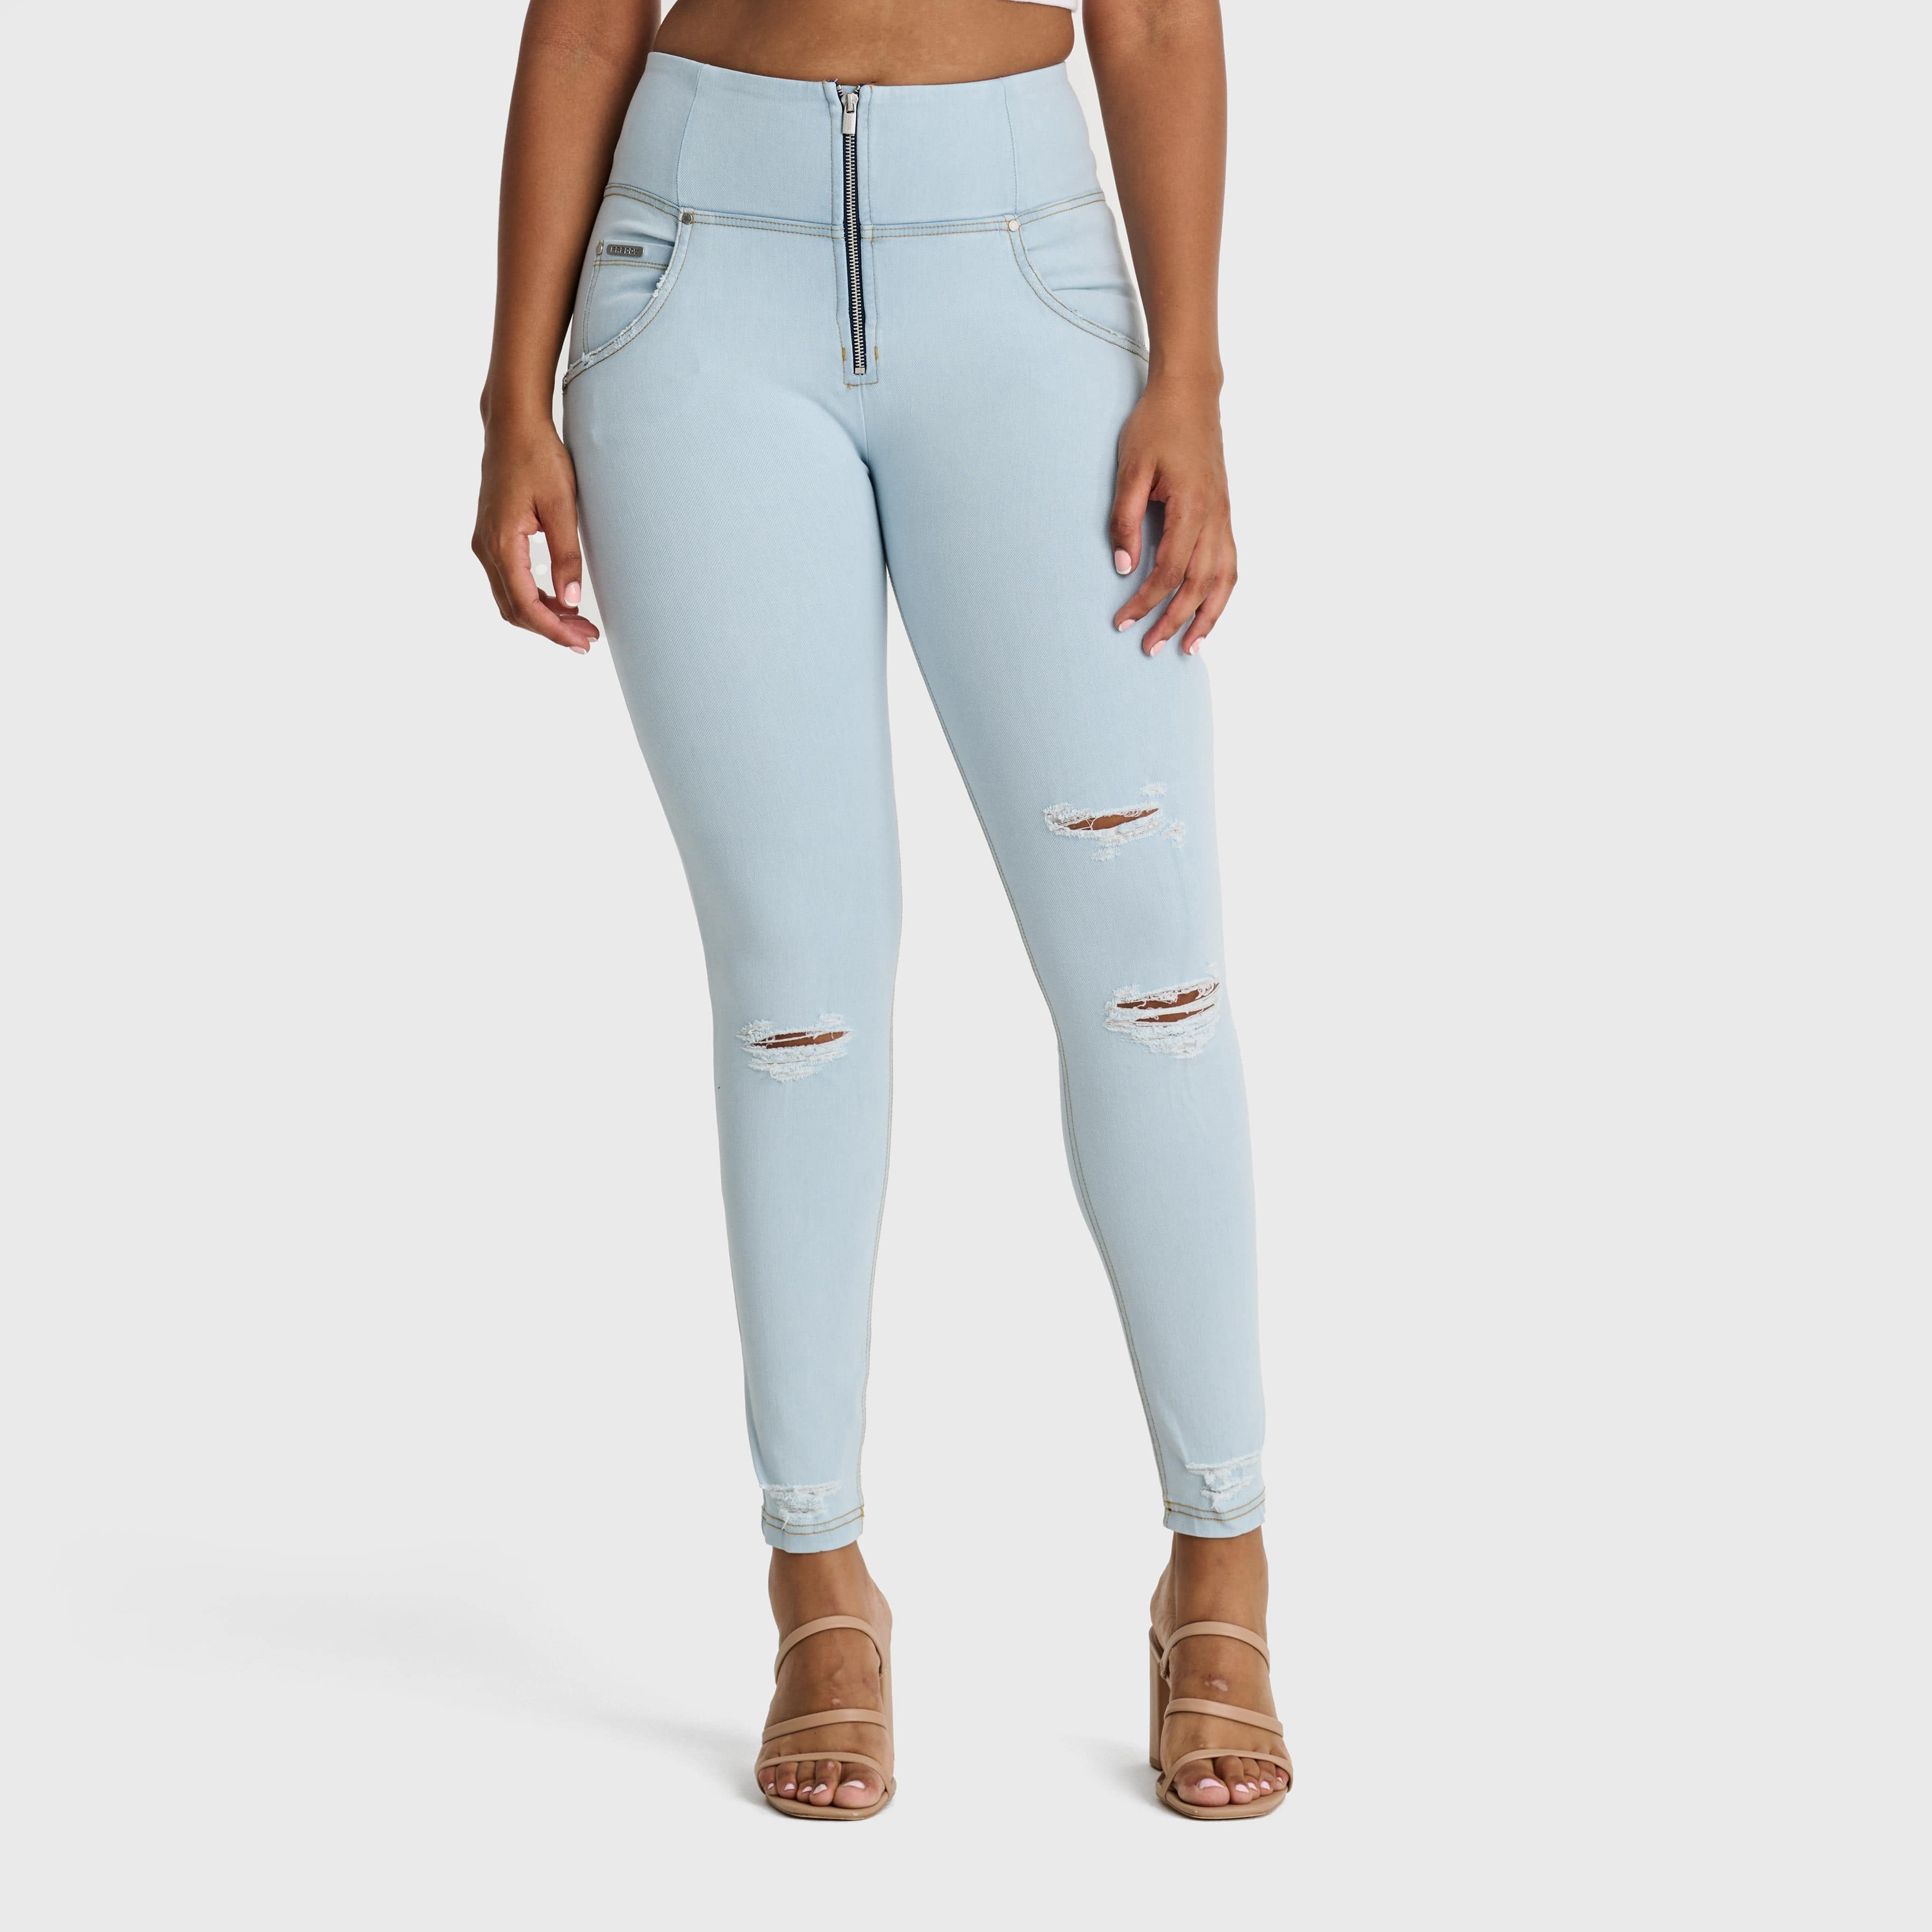 WR.UP® Snug Distressed Jeans - High Waisted - Full Length - Baby Blue + Yellow Stitching 2